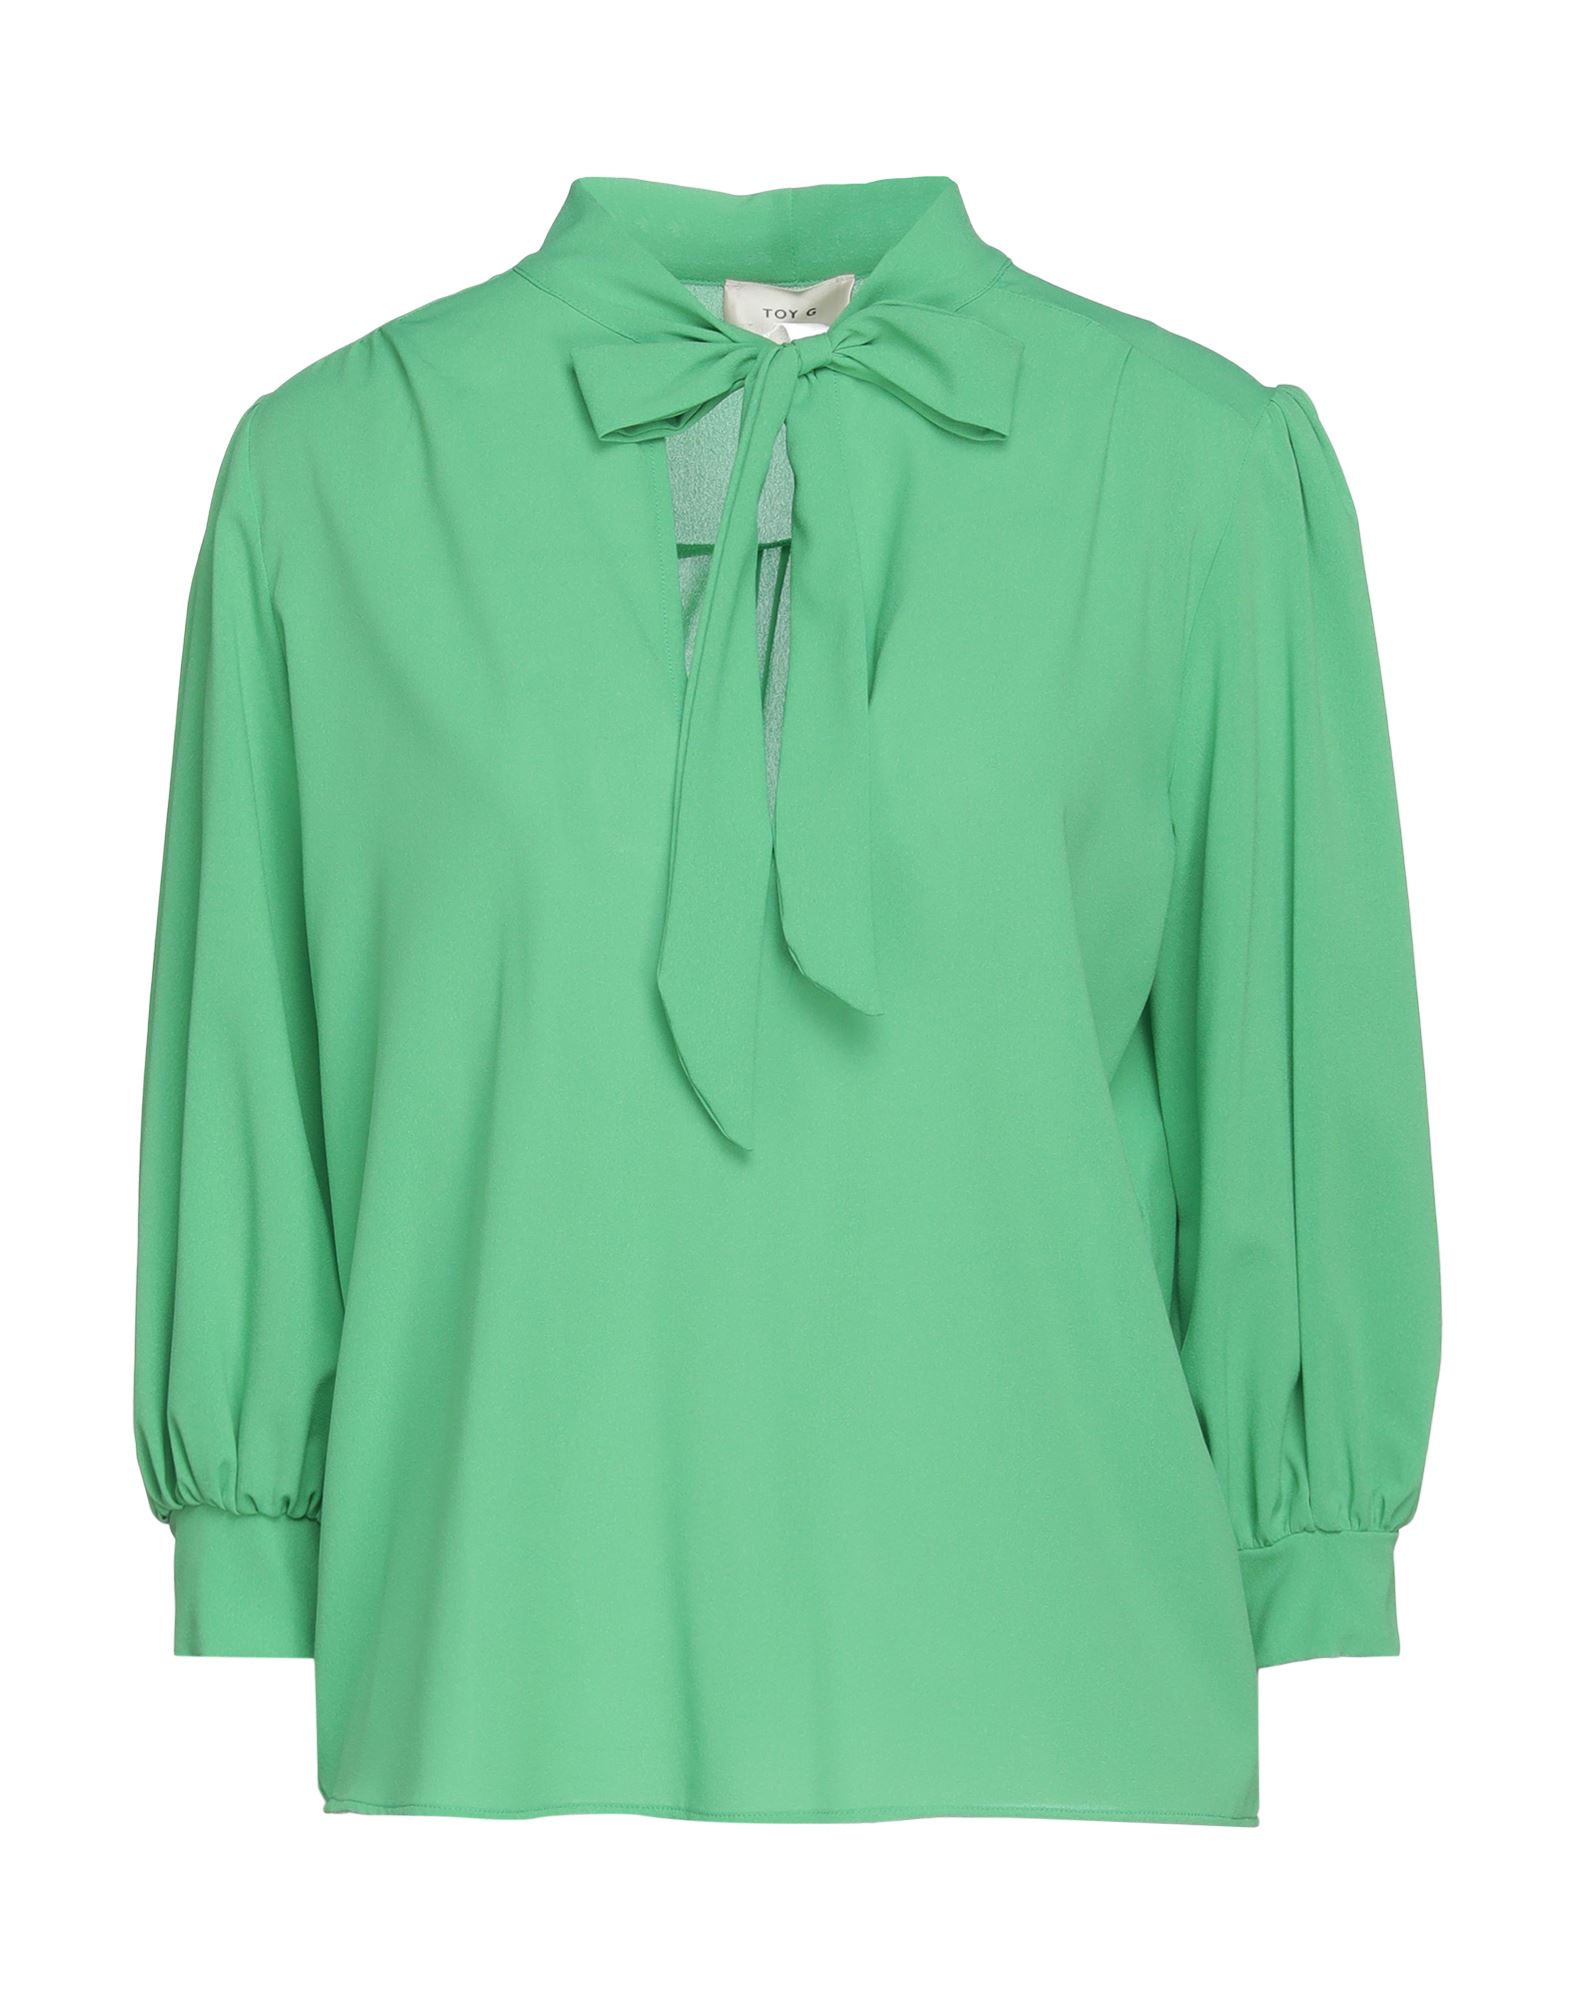 TOY G. TOY G. WOMAN TOP GREEN SIZE M POLYESTER